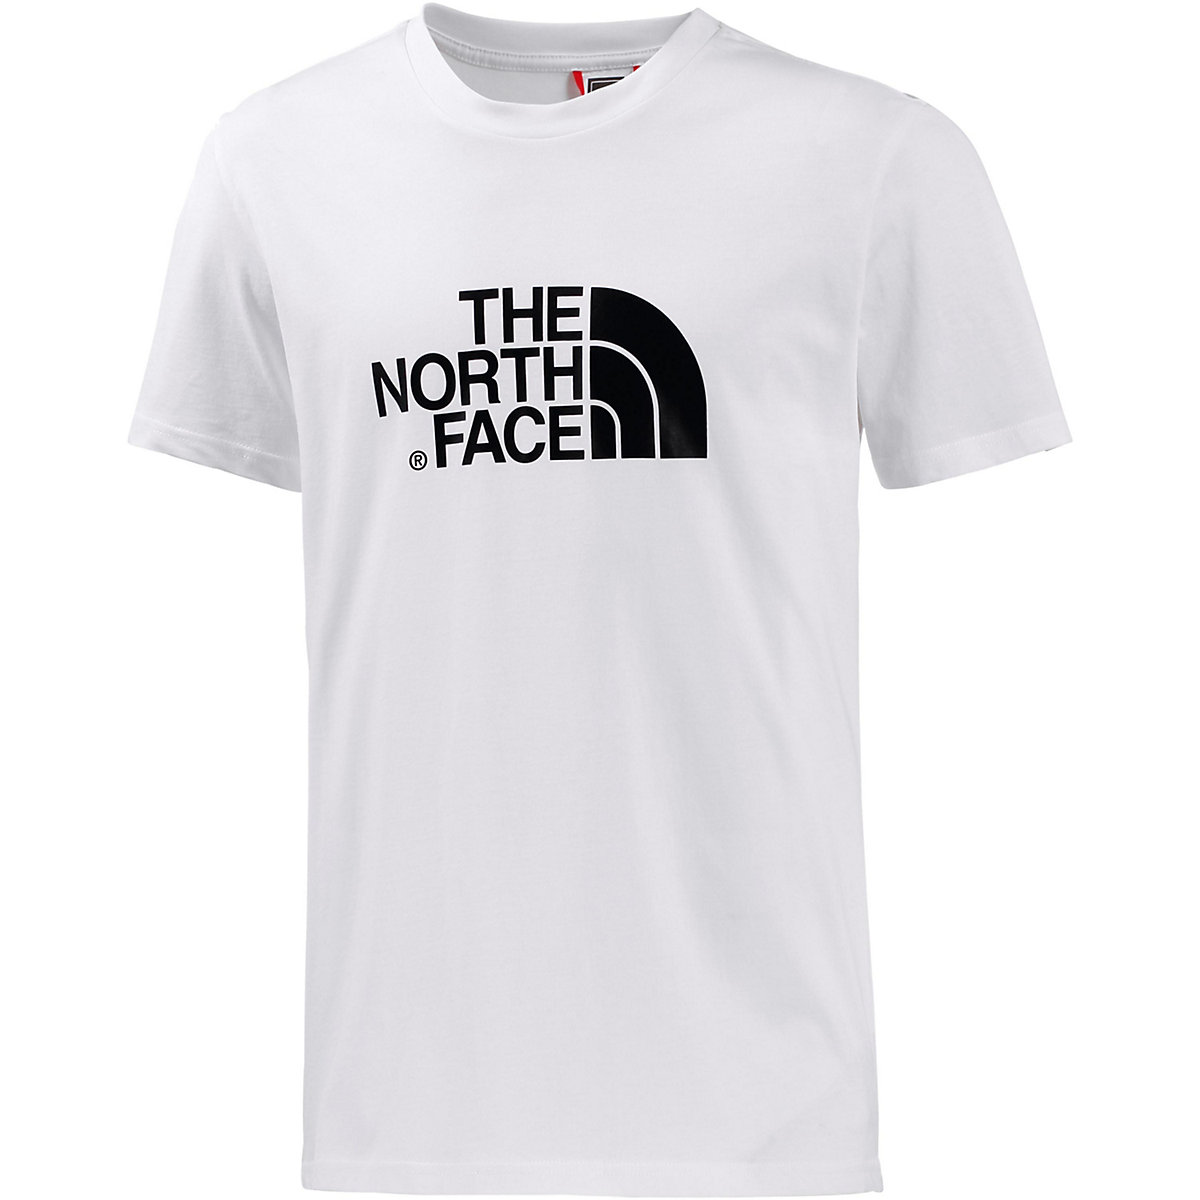 THE NORTH FACE T-Shirt Easy weiß